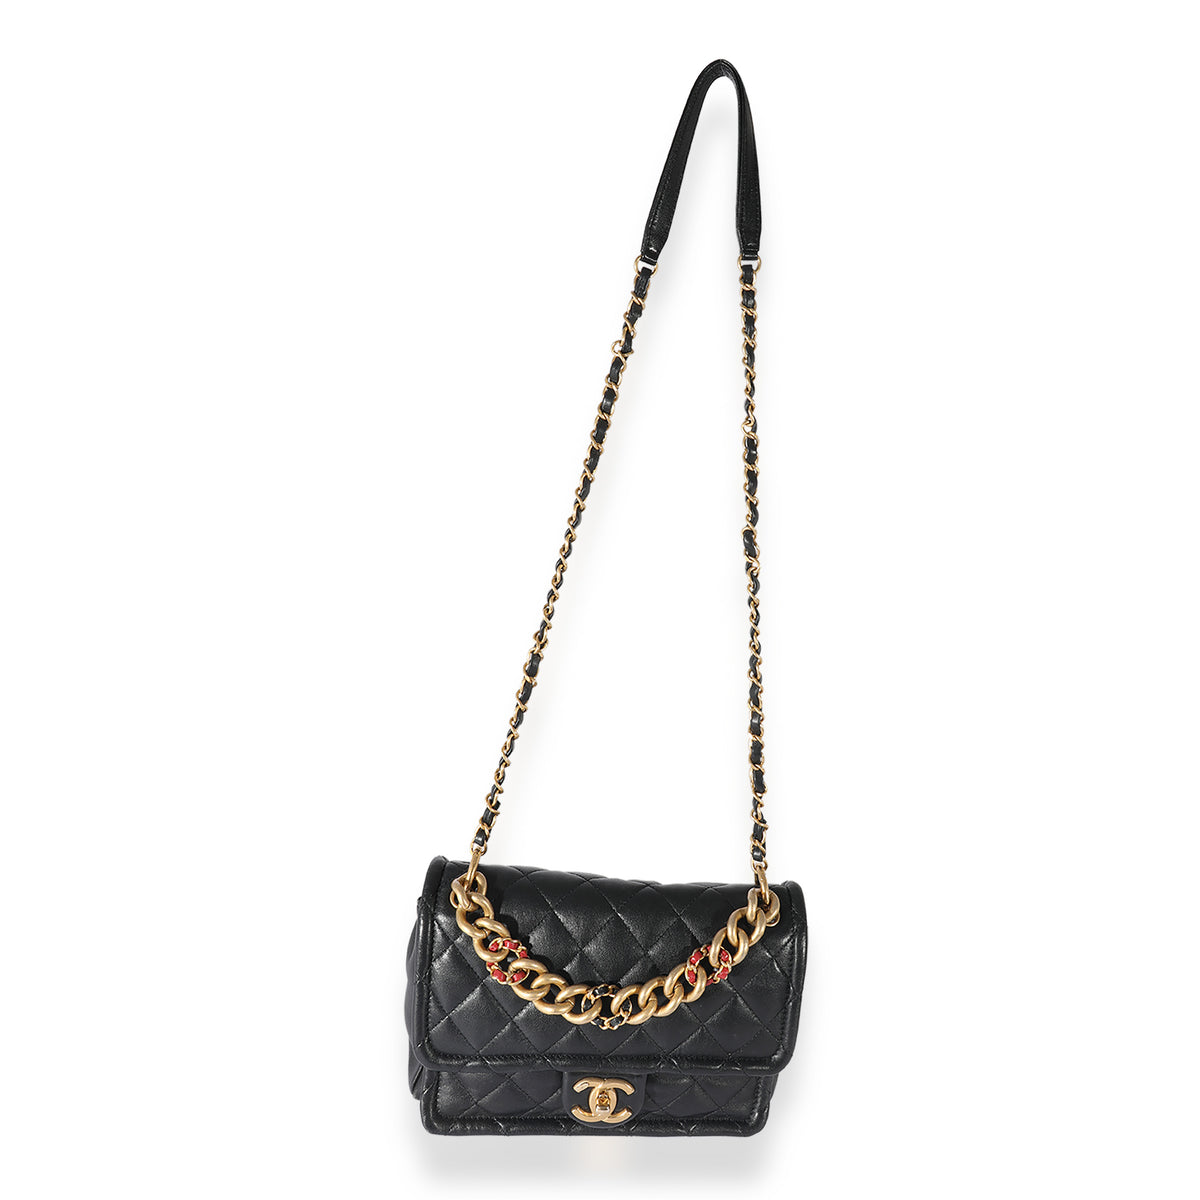 Chanel Black Quilted Lambskin Chain Link Bag, myGemma, SG